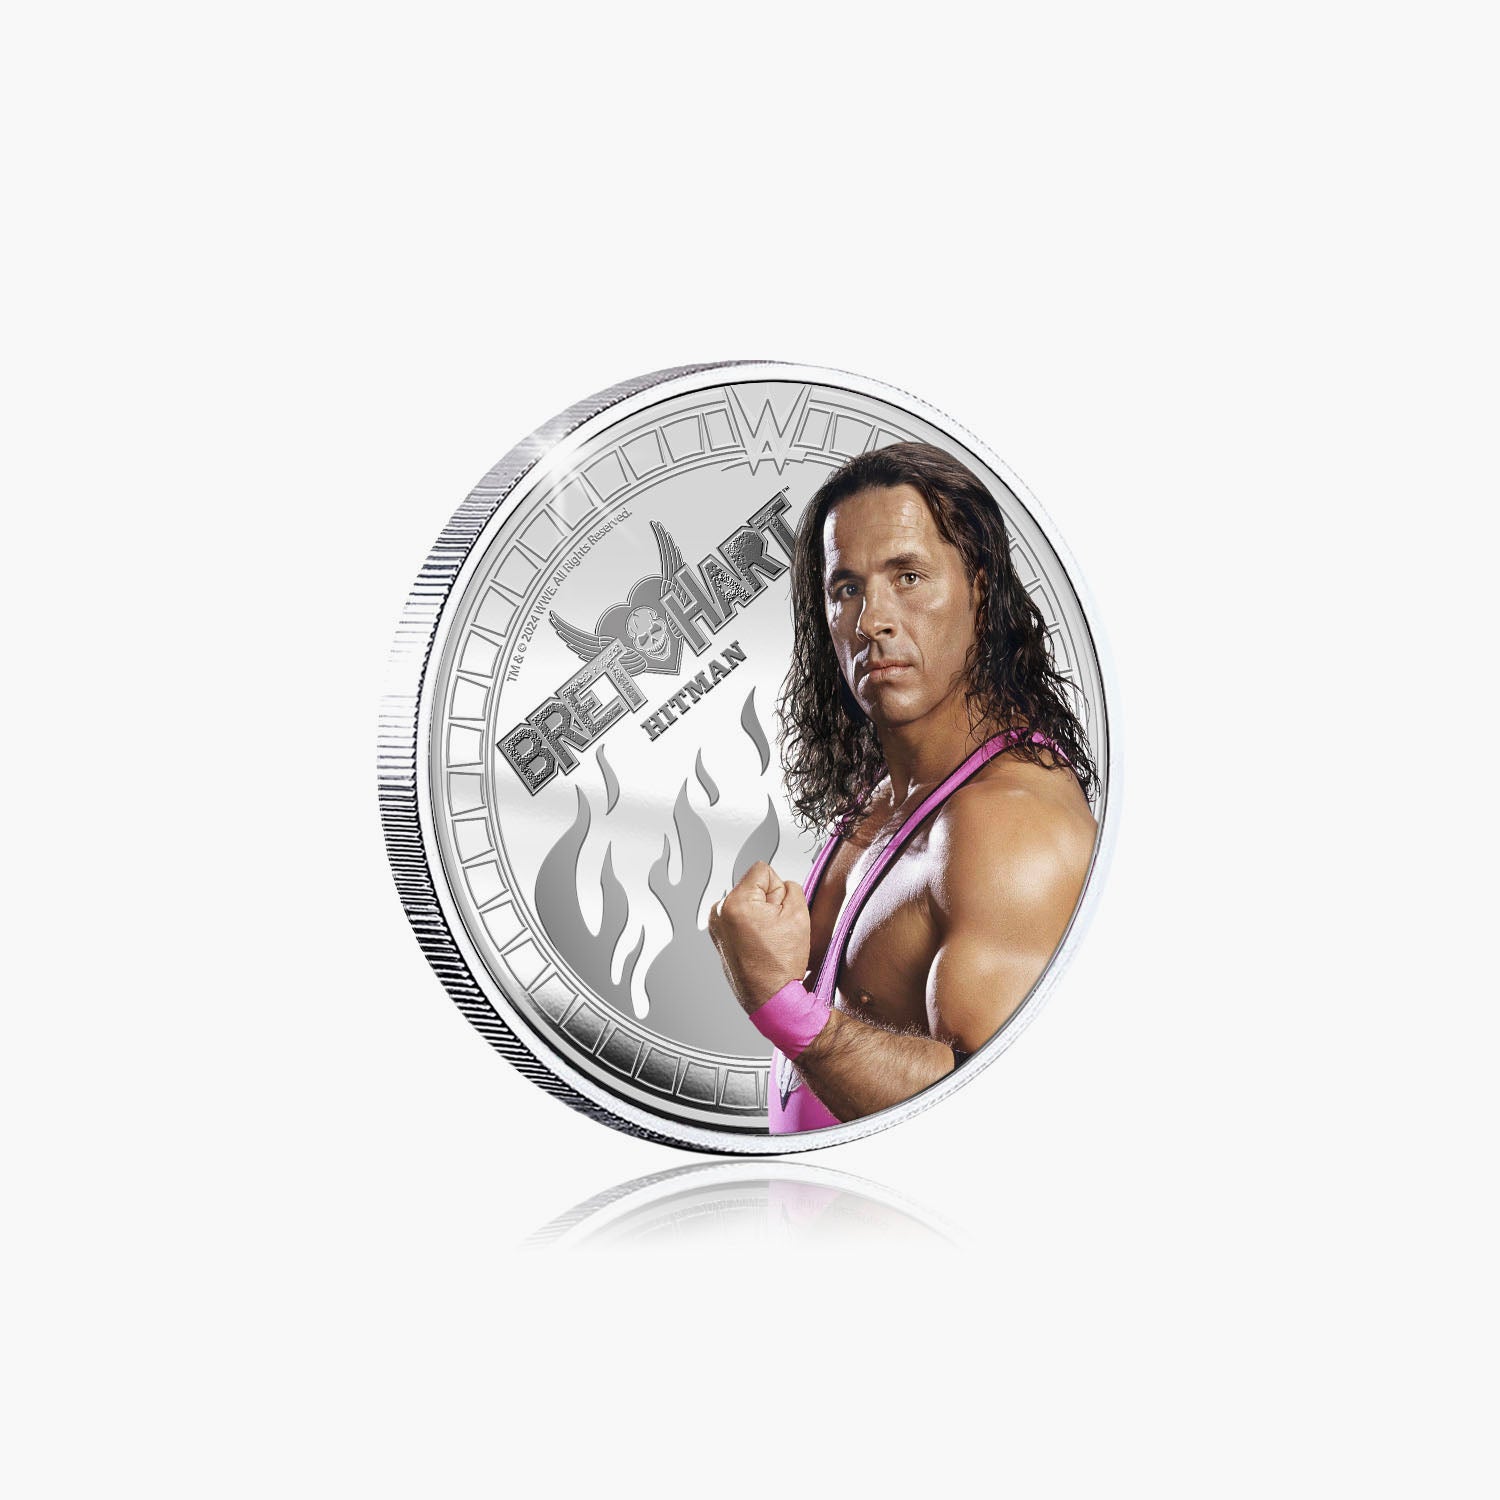 WWE Commemorative Collection - Bret Hit Man Hart - 32mm Silver Plated Commemorative